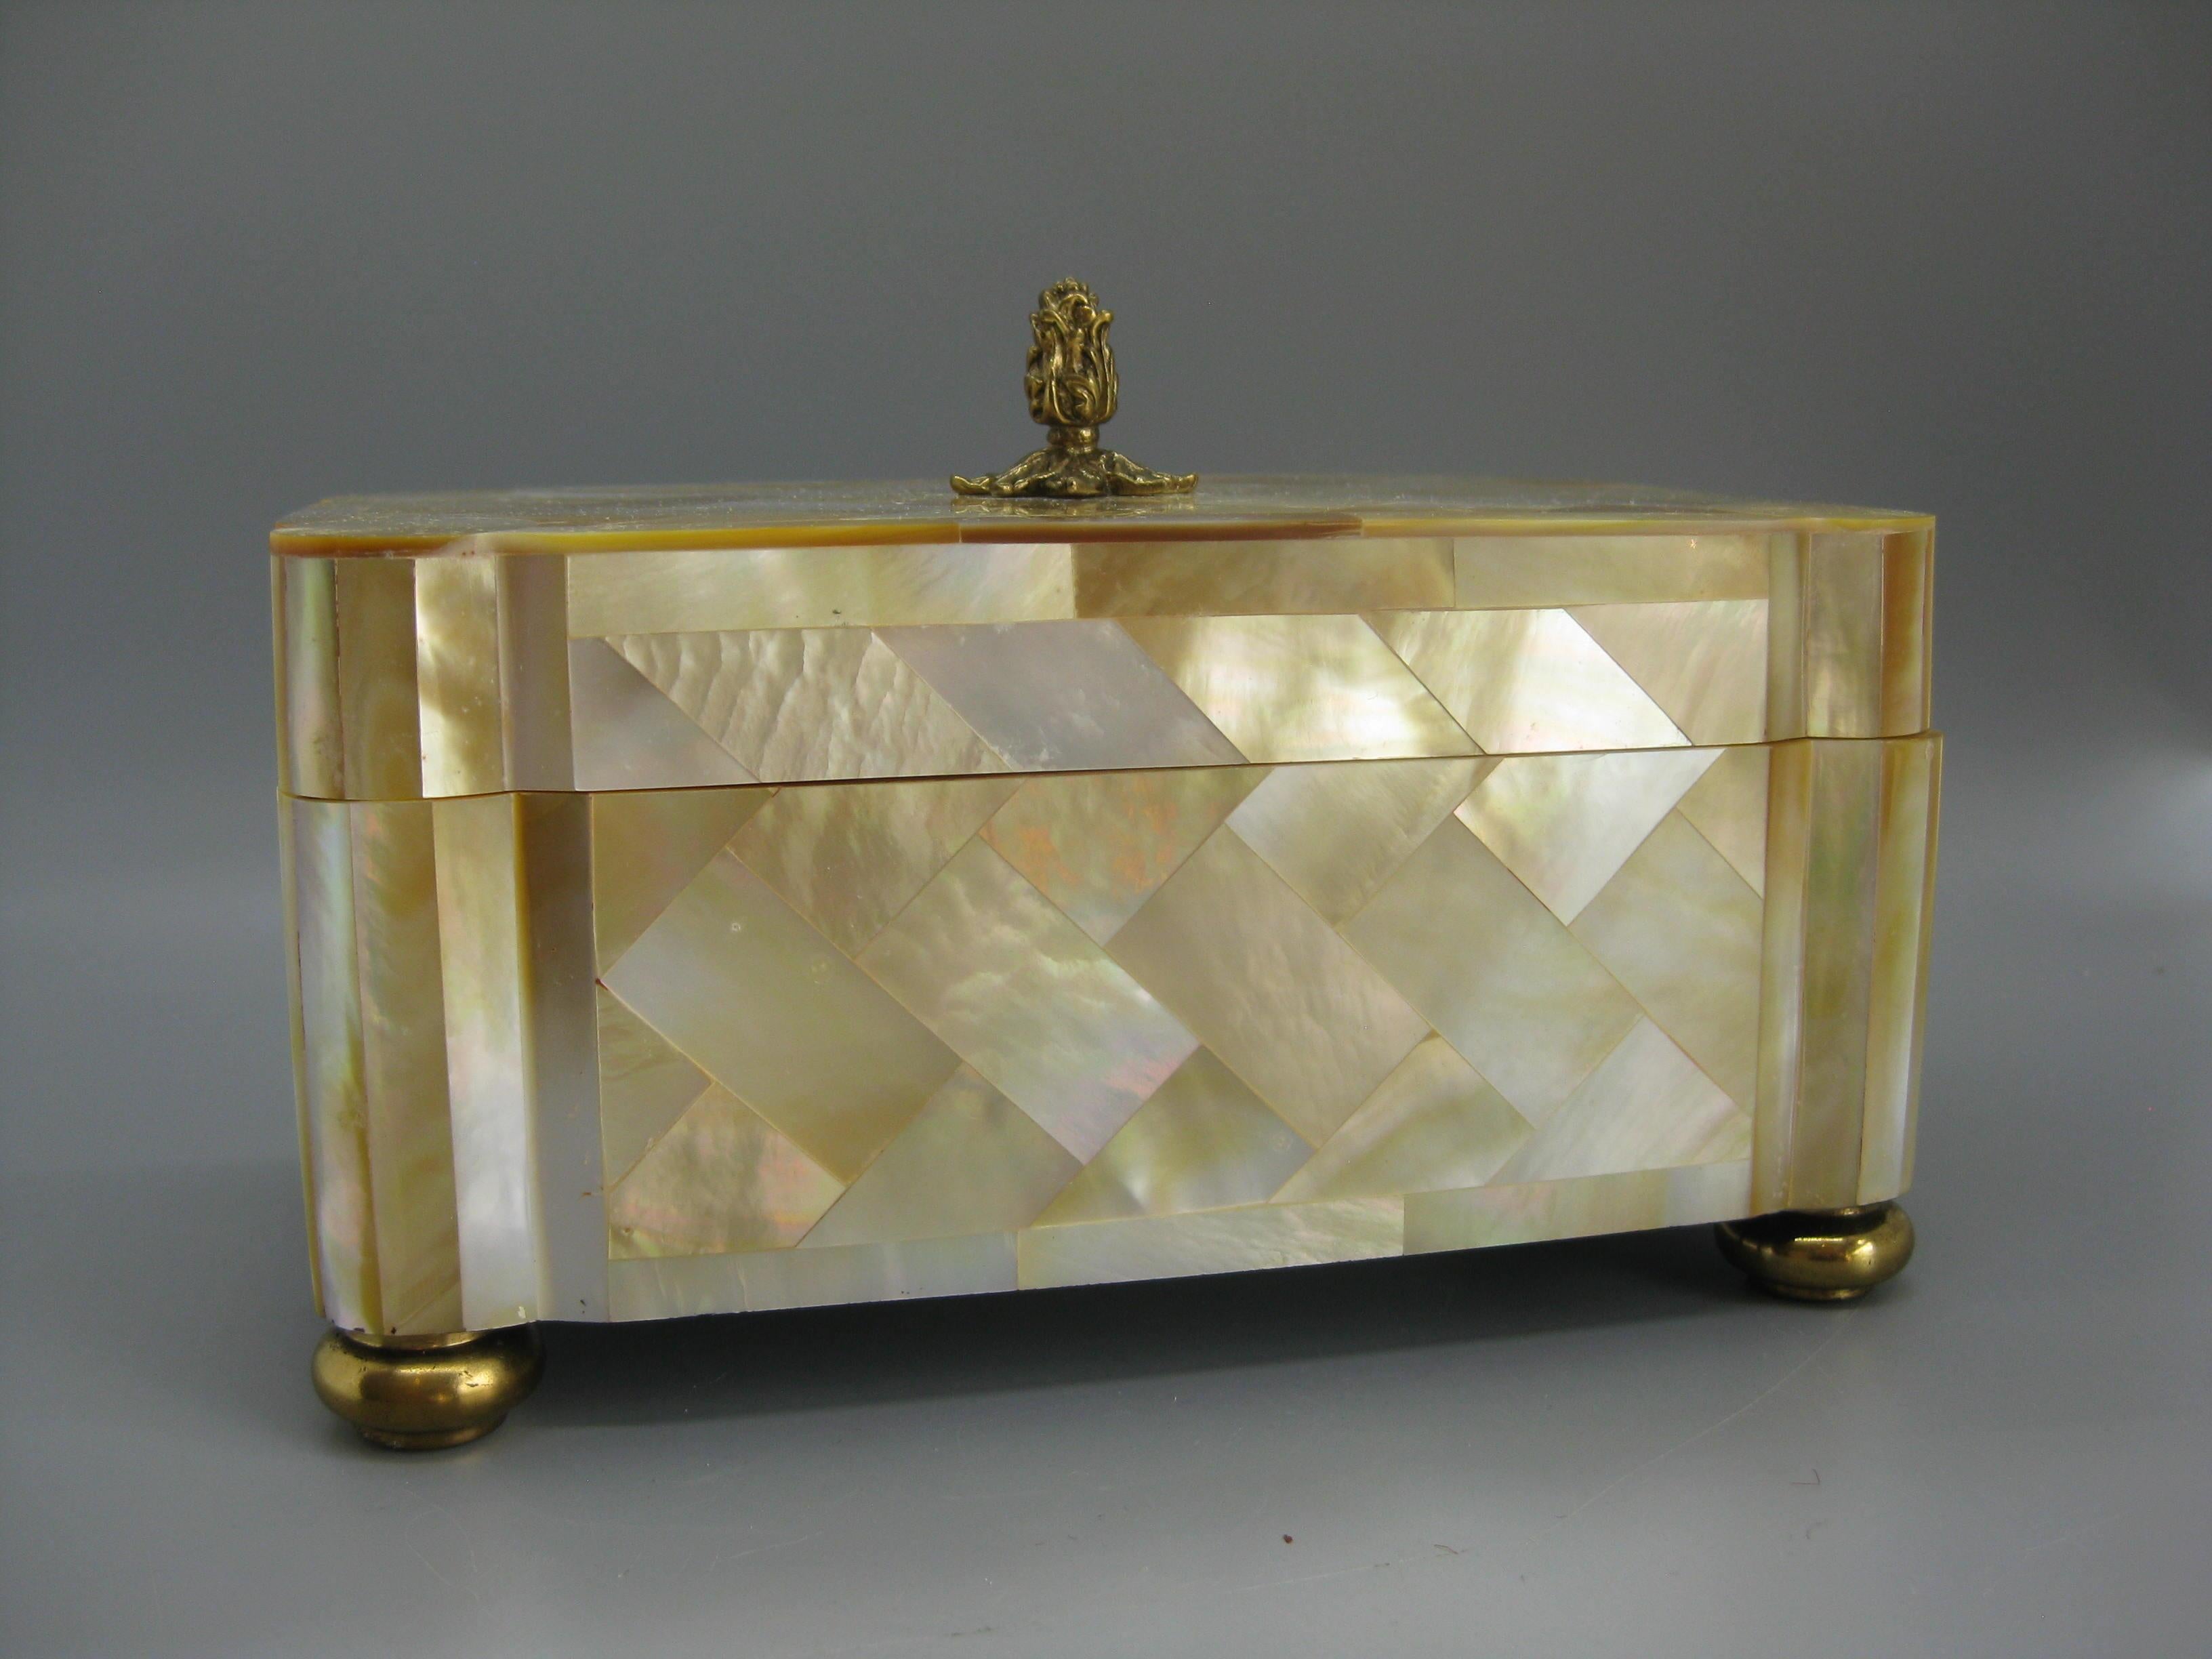 We are offering a beautiful elegant natural mother of pearl over wood tessellated mosaic decorative stash box designed by Maitland Smith. This box does not have the original tag on the inside, but guaranteed designed by Maitland Smith. The box has